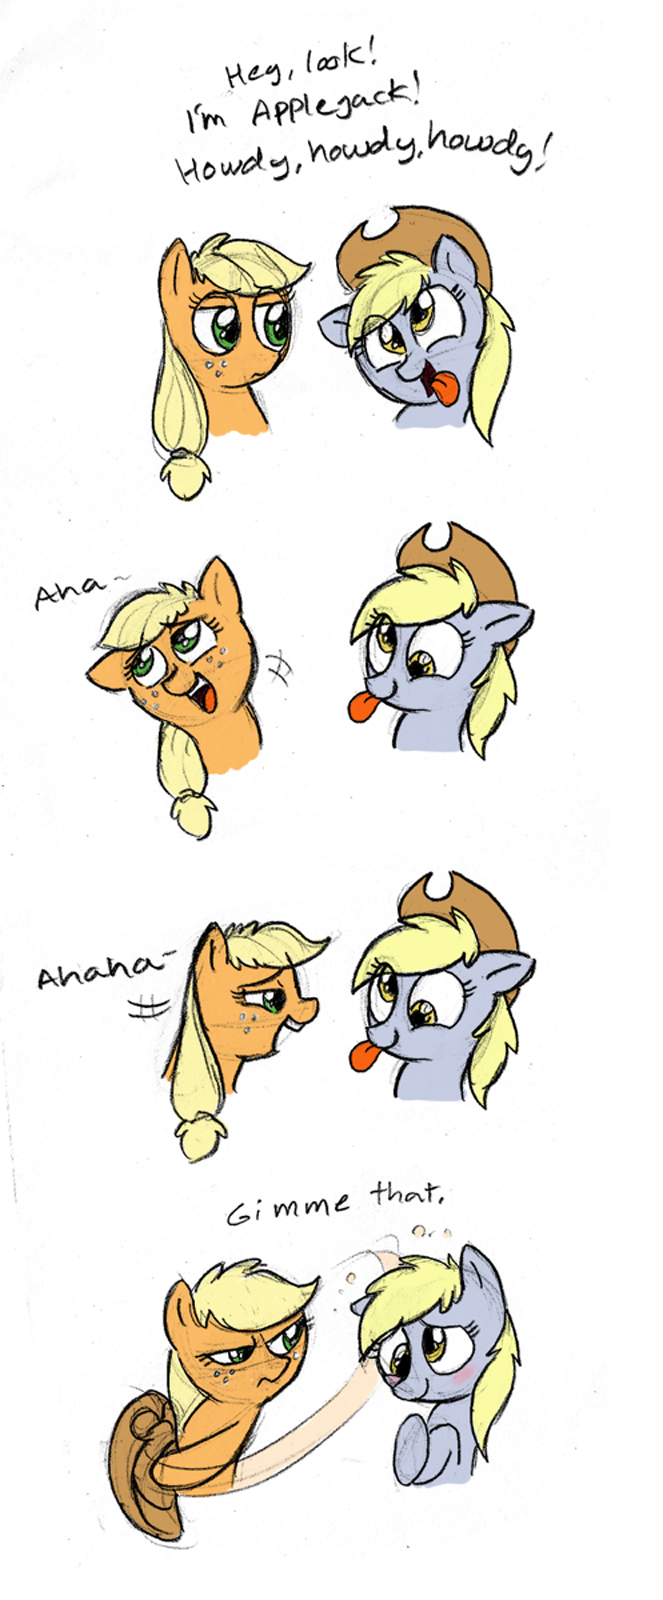 derpy__s_impersonation_by_mickeymonster-d5eoblp.png